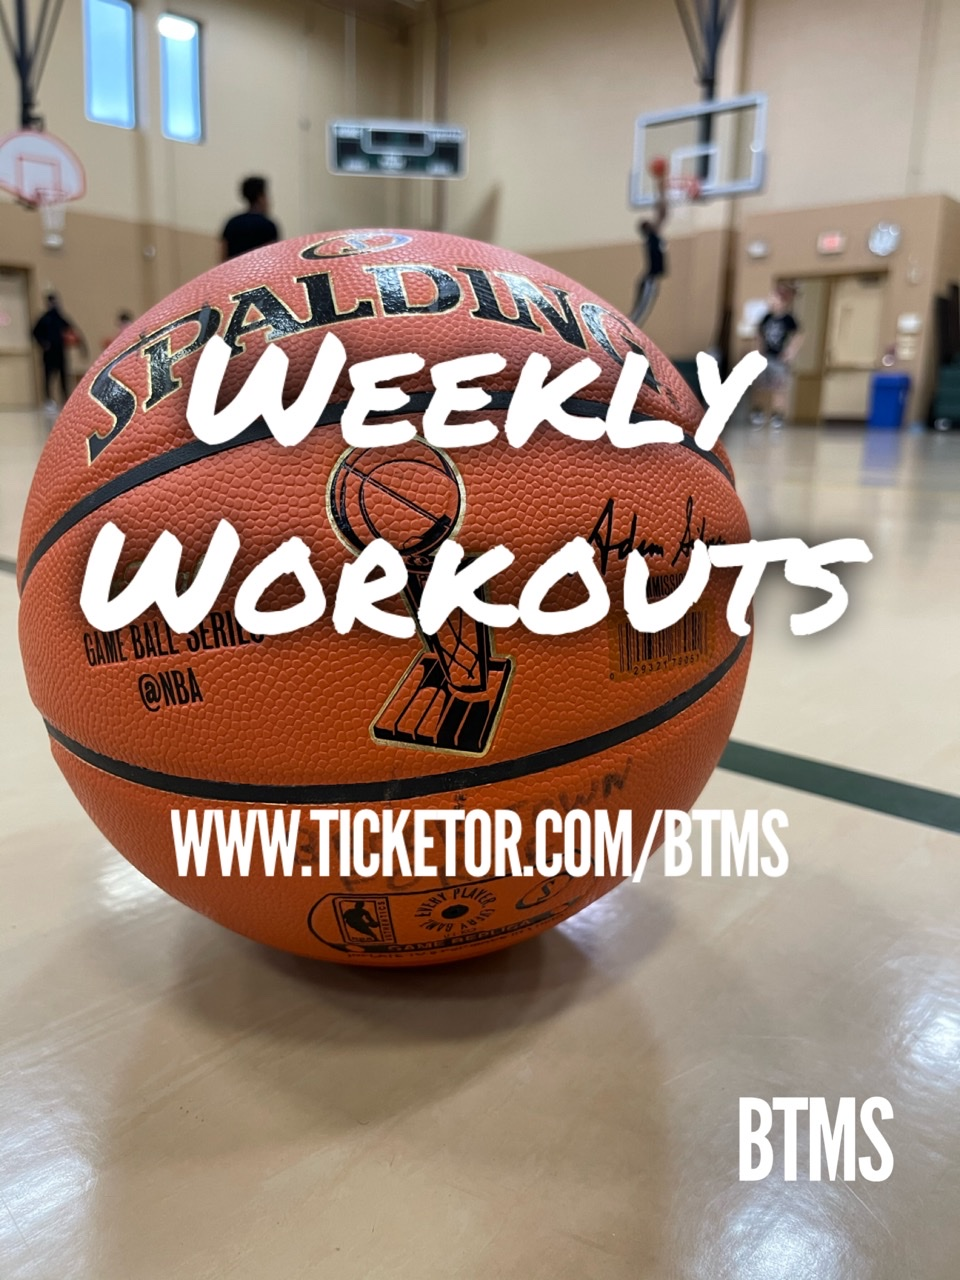 Weekly Workouts Basketball workout for skills, knowledge and basketball conditioning on Dec 31, 00:00@Oak Lawn Pavilion - Buy tickets and Get information on BTMS LLC 